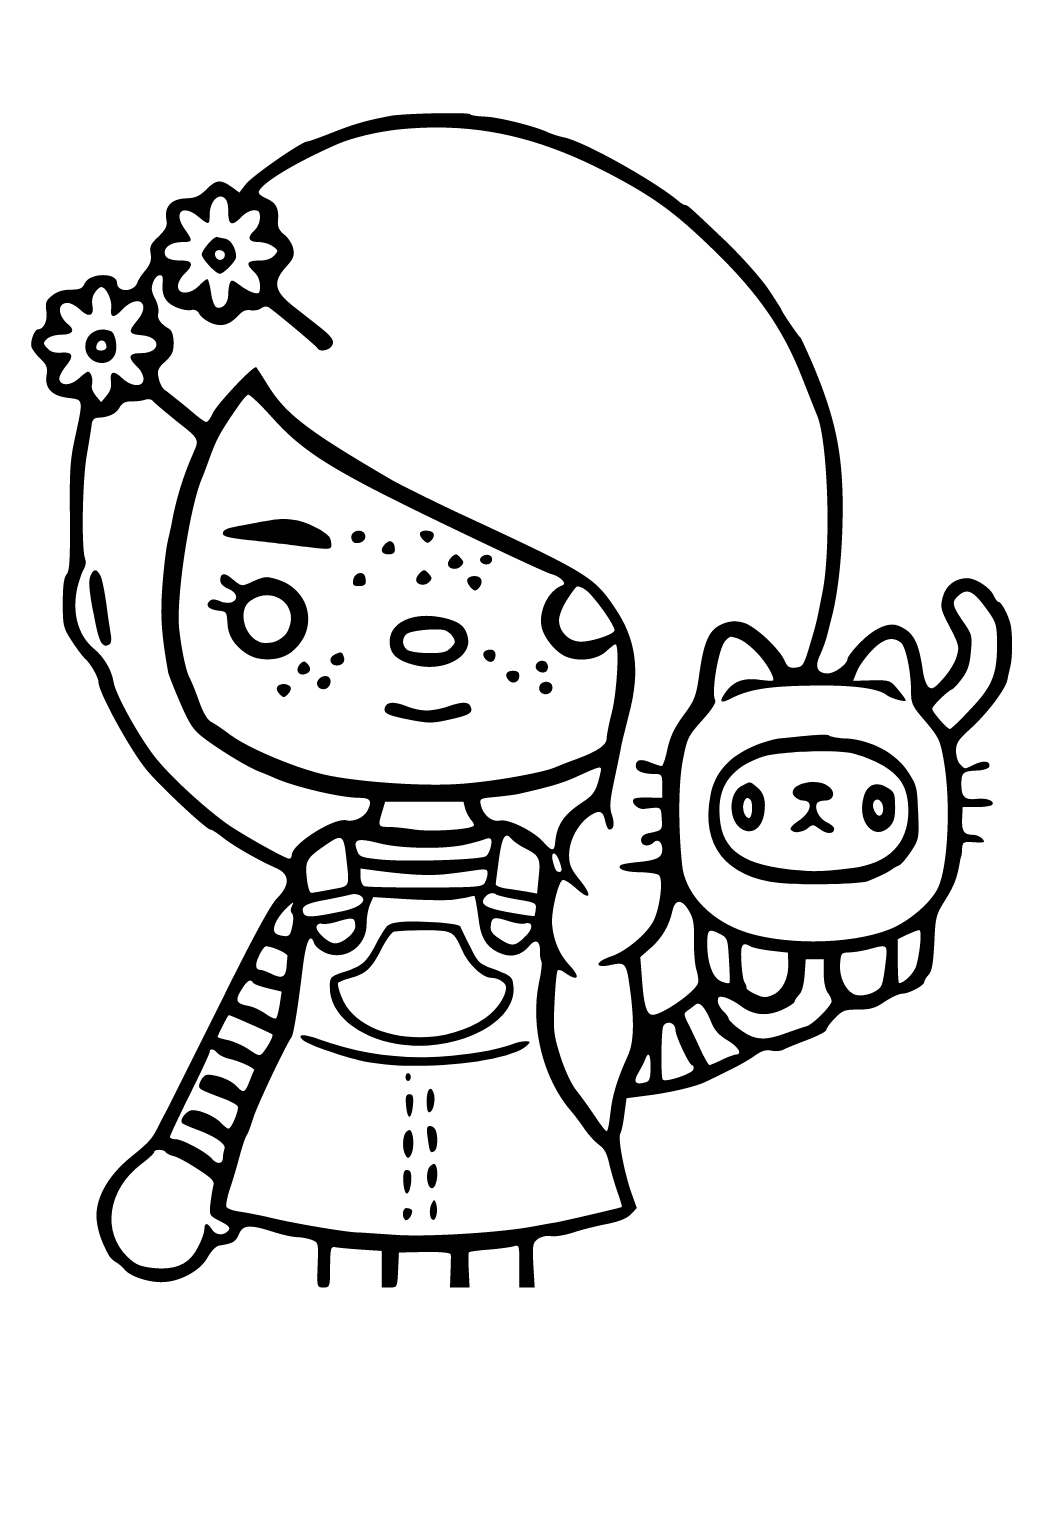 Free Printable Toca Boca Friends Coloring Page, Sheet and Picture ...